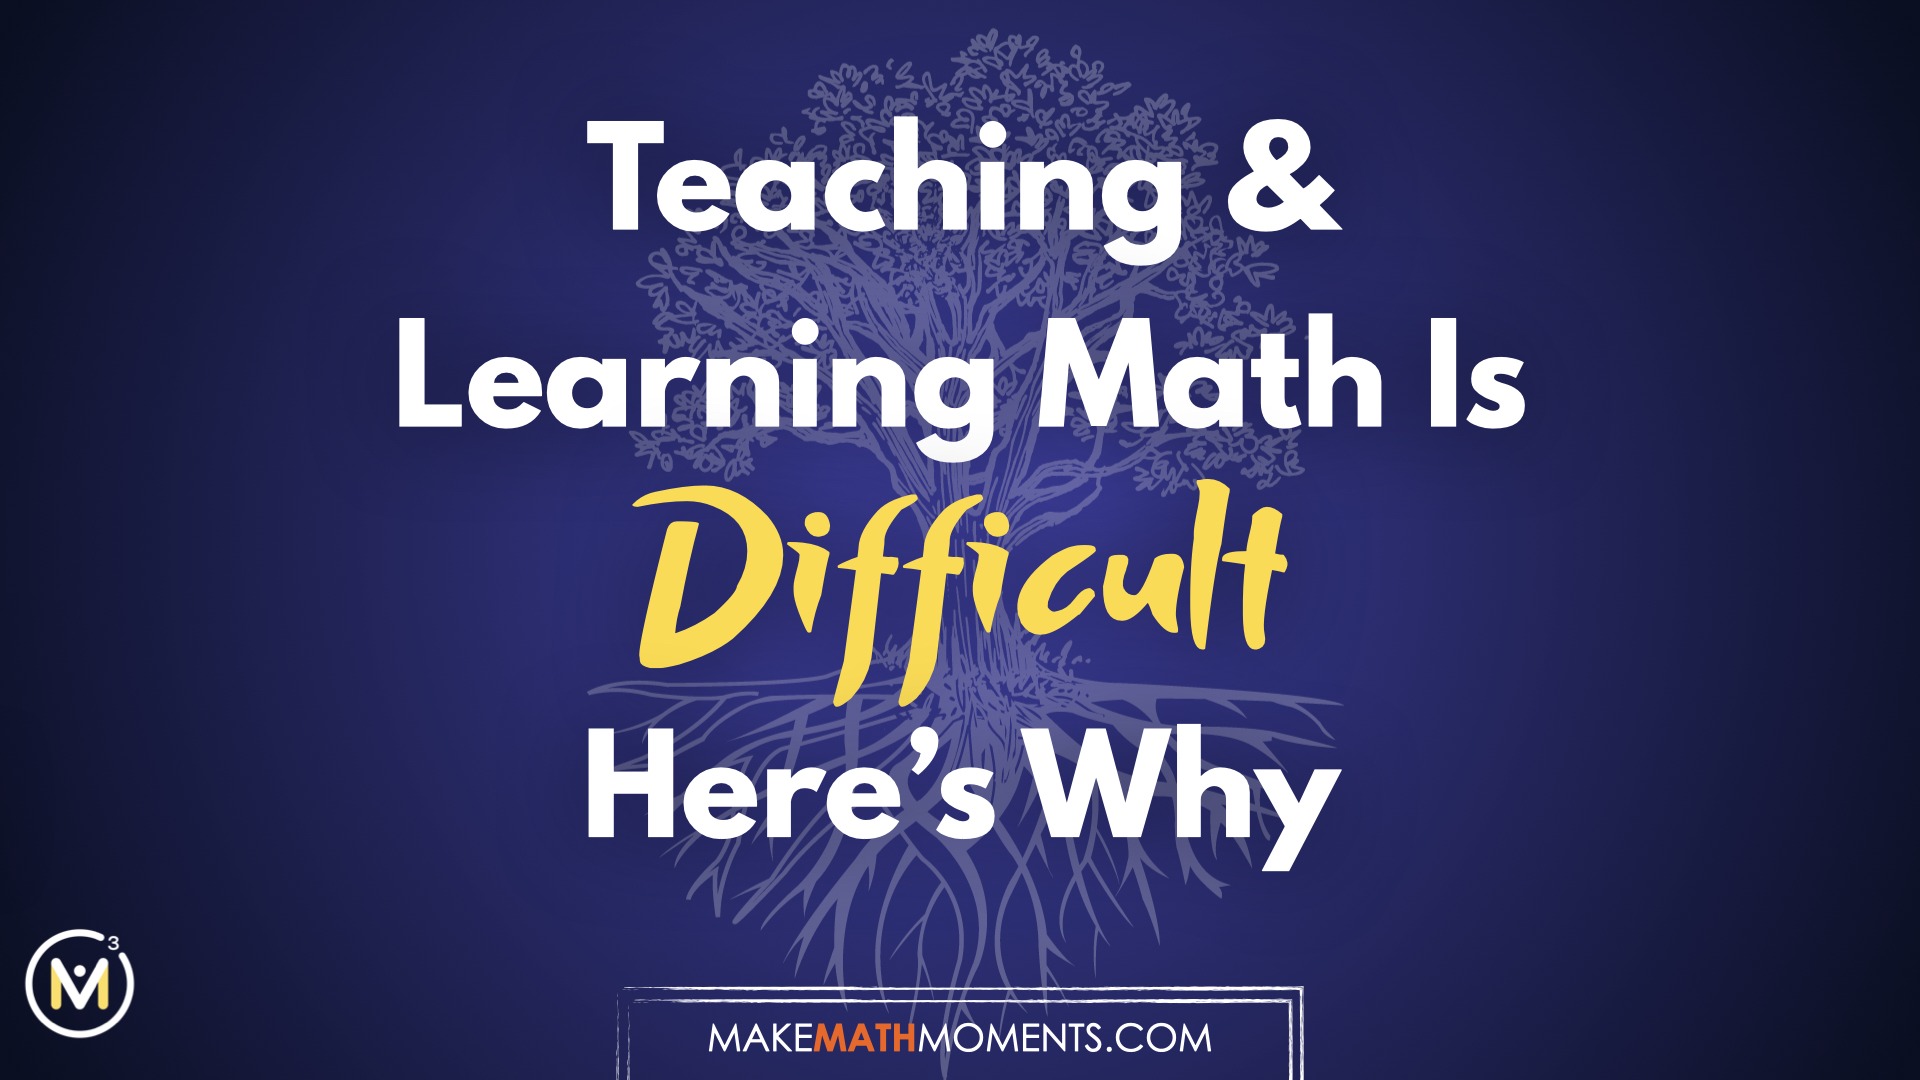 Teaching & Learning Math Is Difficult. Here’s Why…